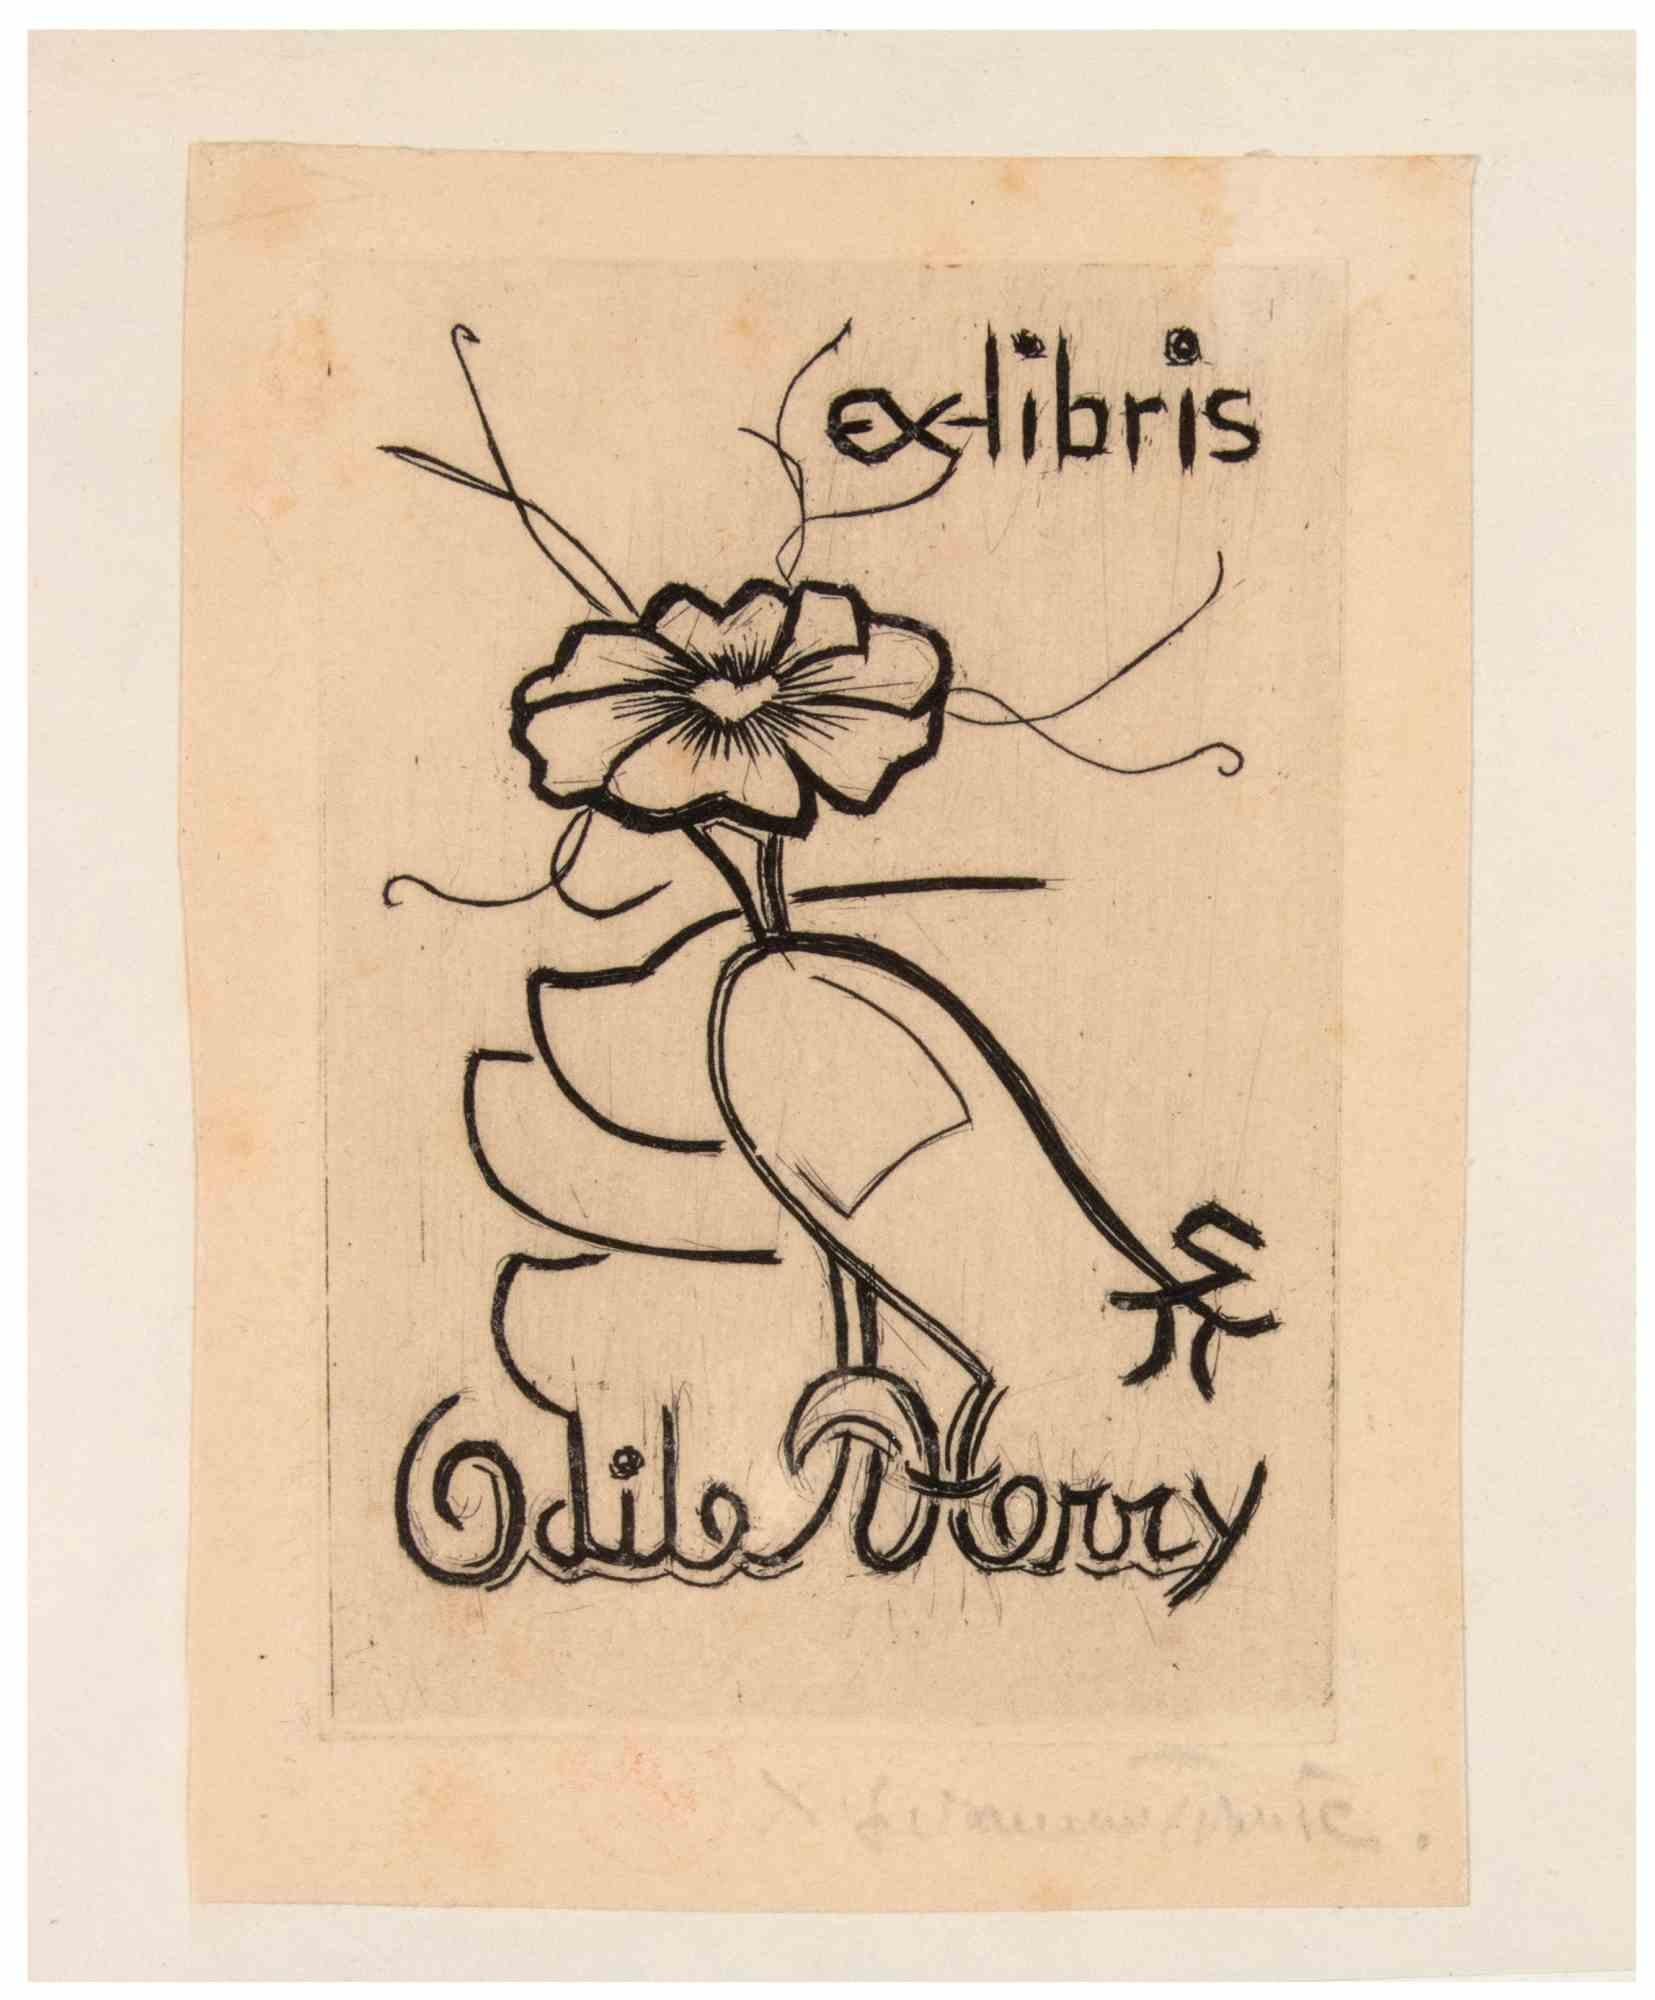 Ex Libris Odile Herry is an Etching realized by Suzanne Tourte (1904-1979).

Good condition on a little yellowed paper, included a blue cardboard passpartout (27x21.5 cm).

Signed on the lower right corner.